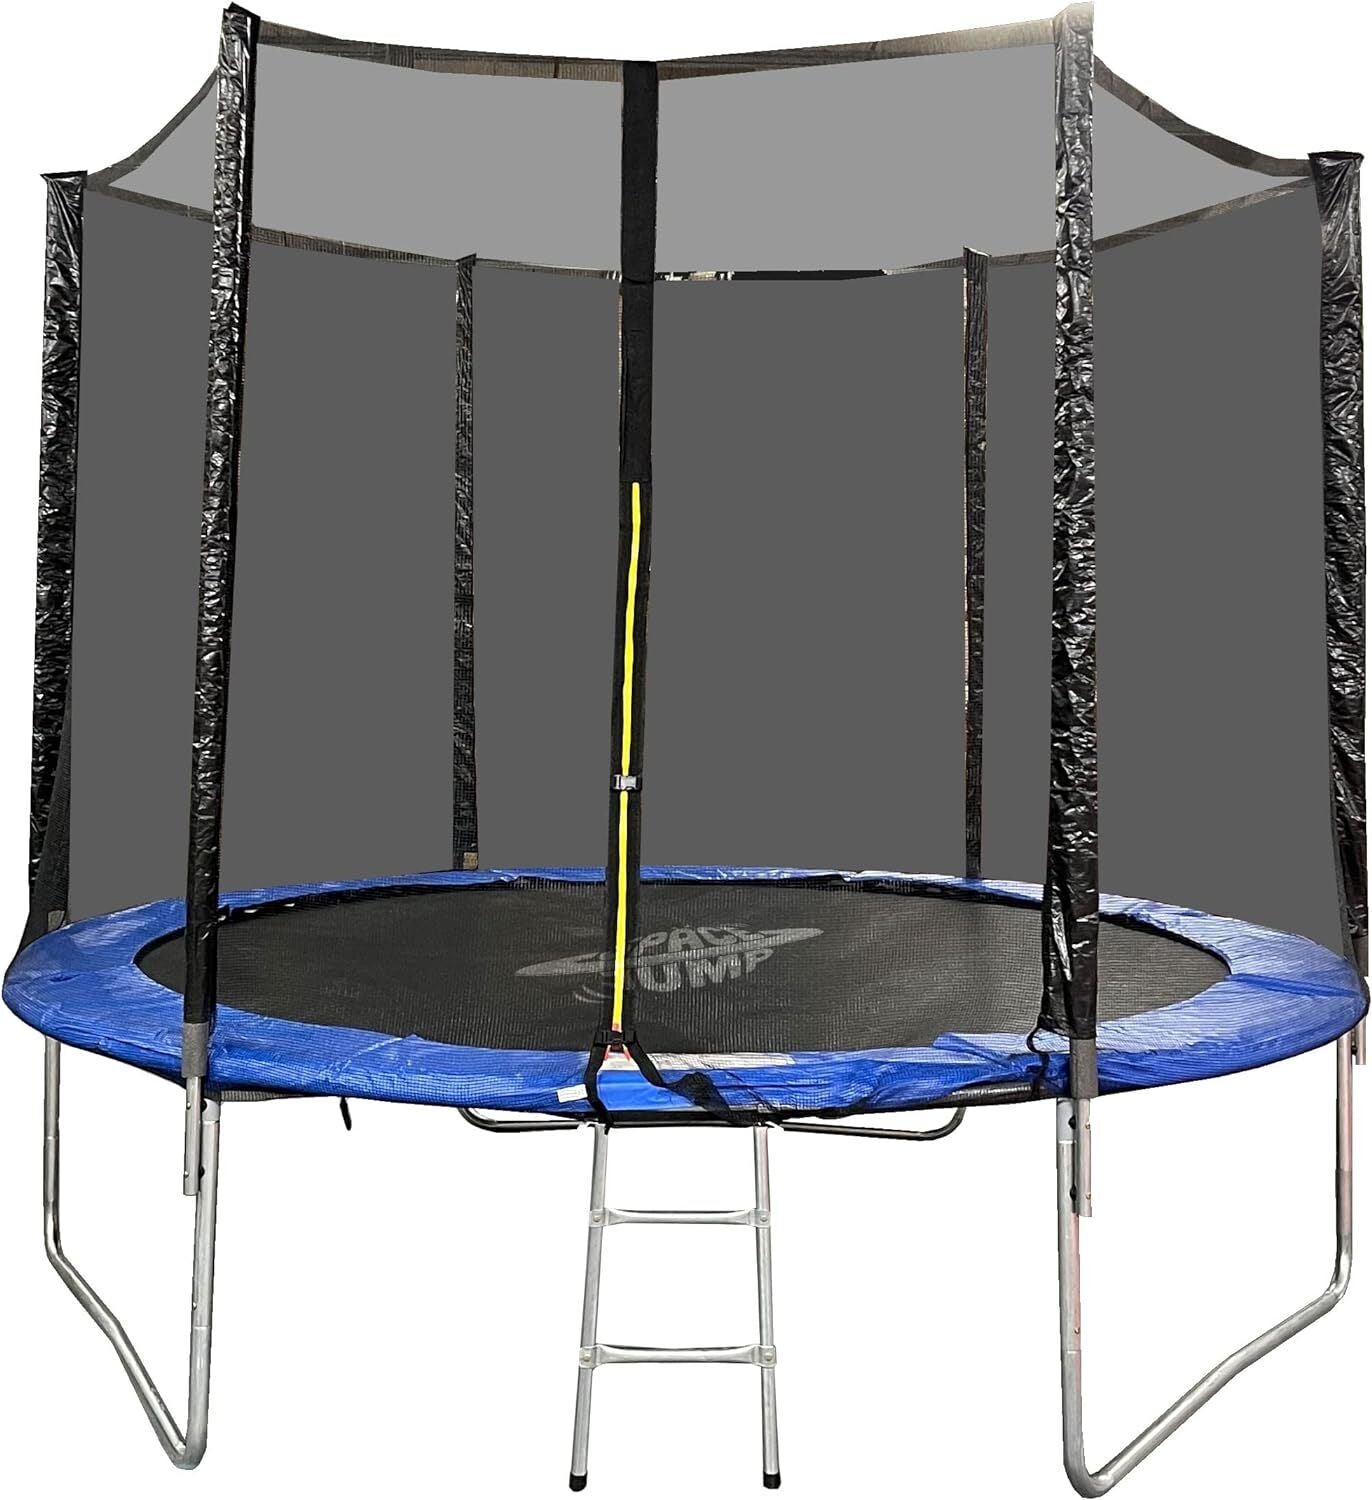 10ft Trampoline and Enclosure